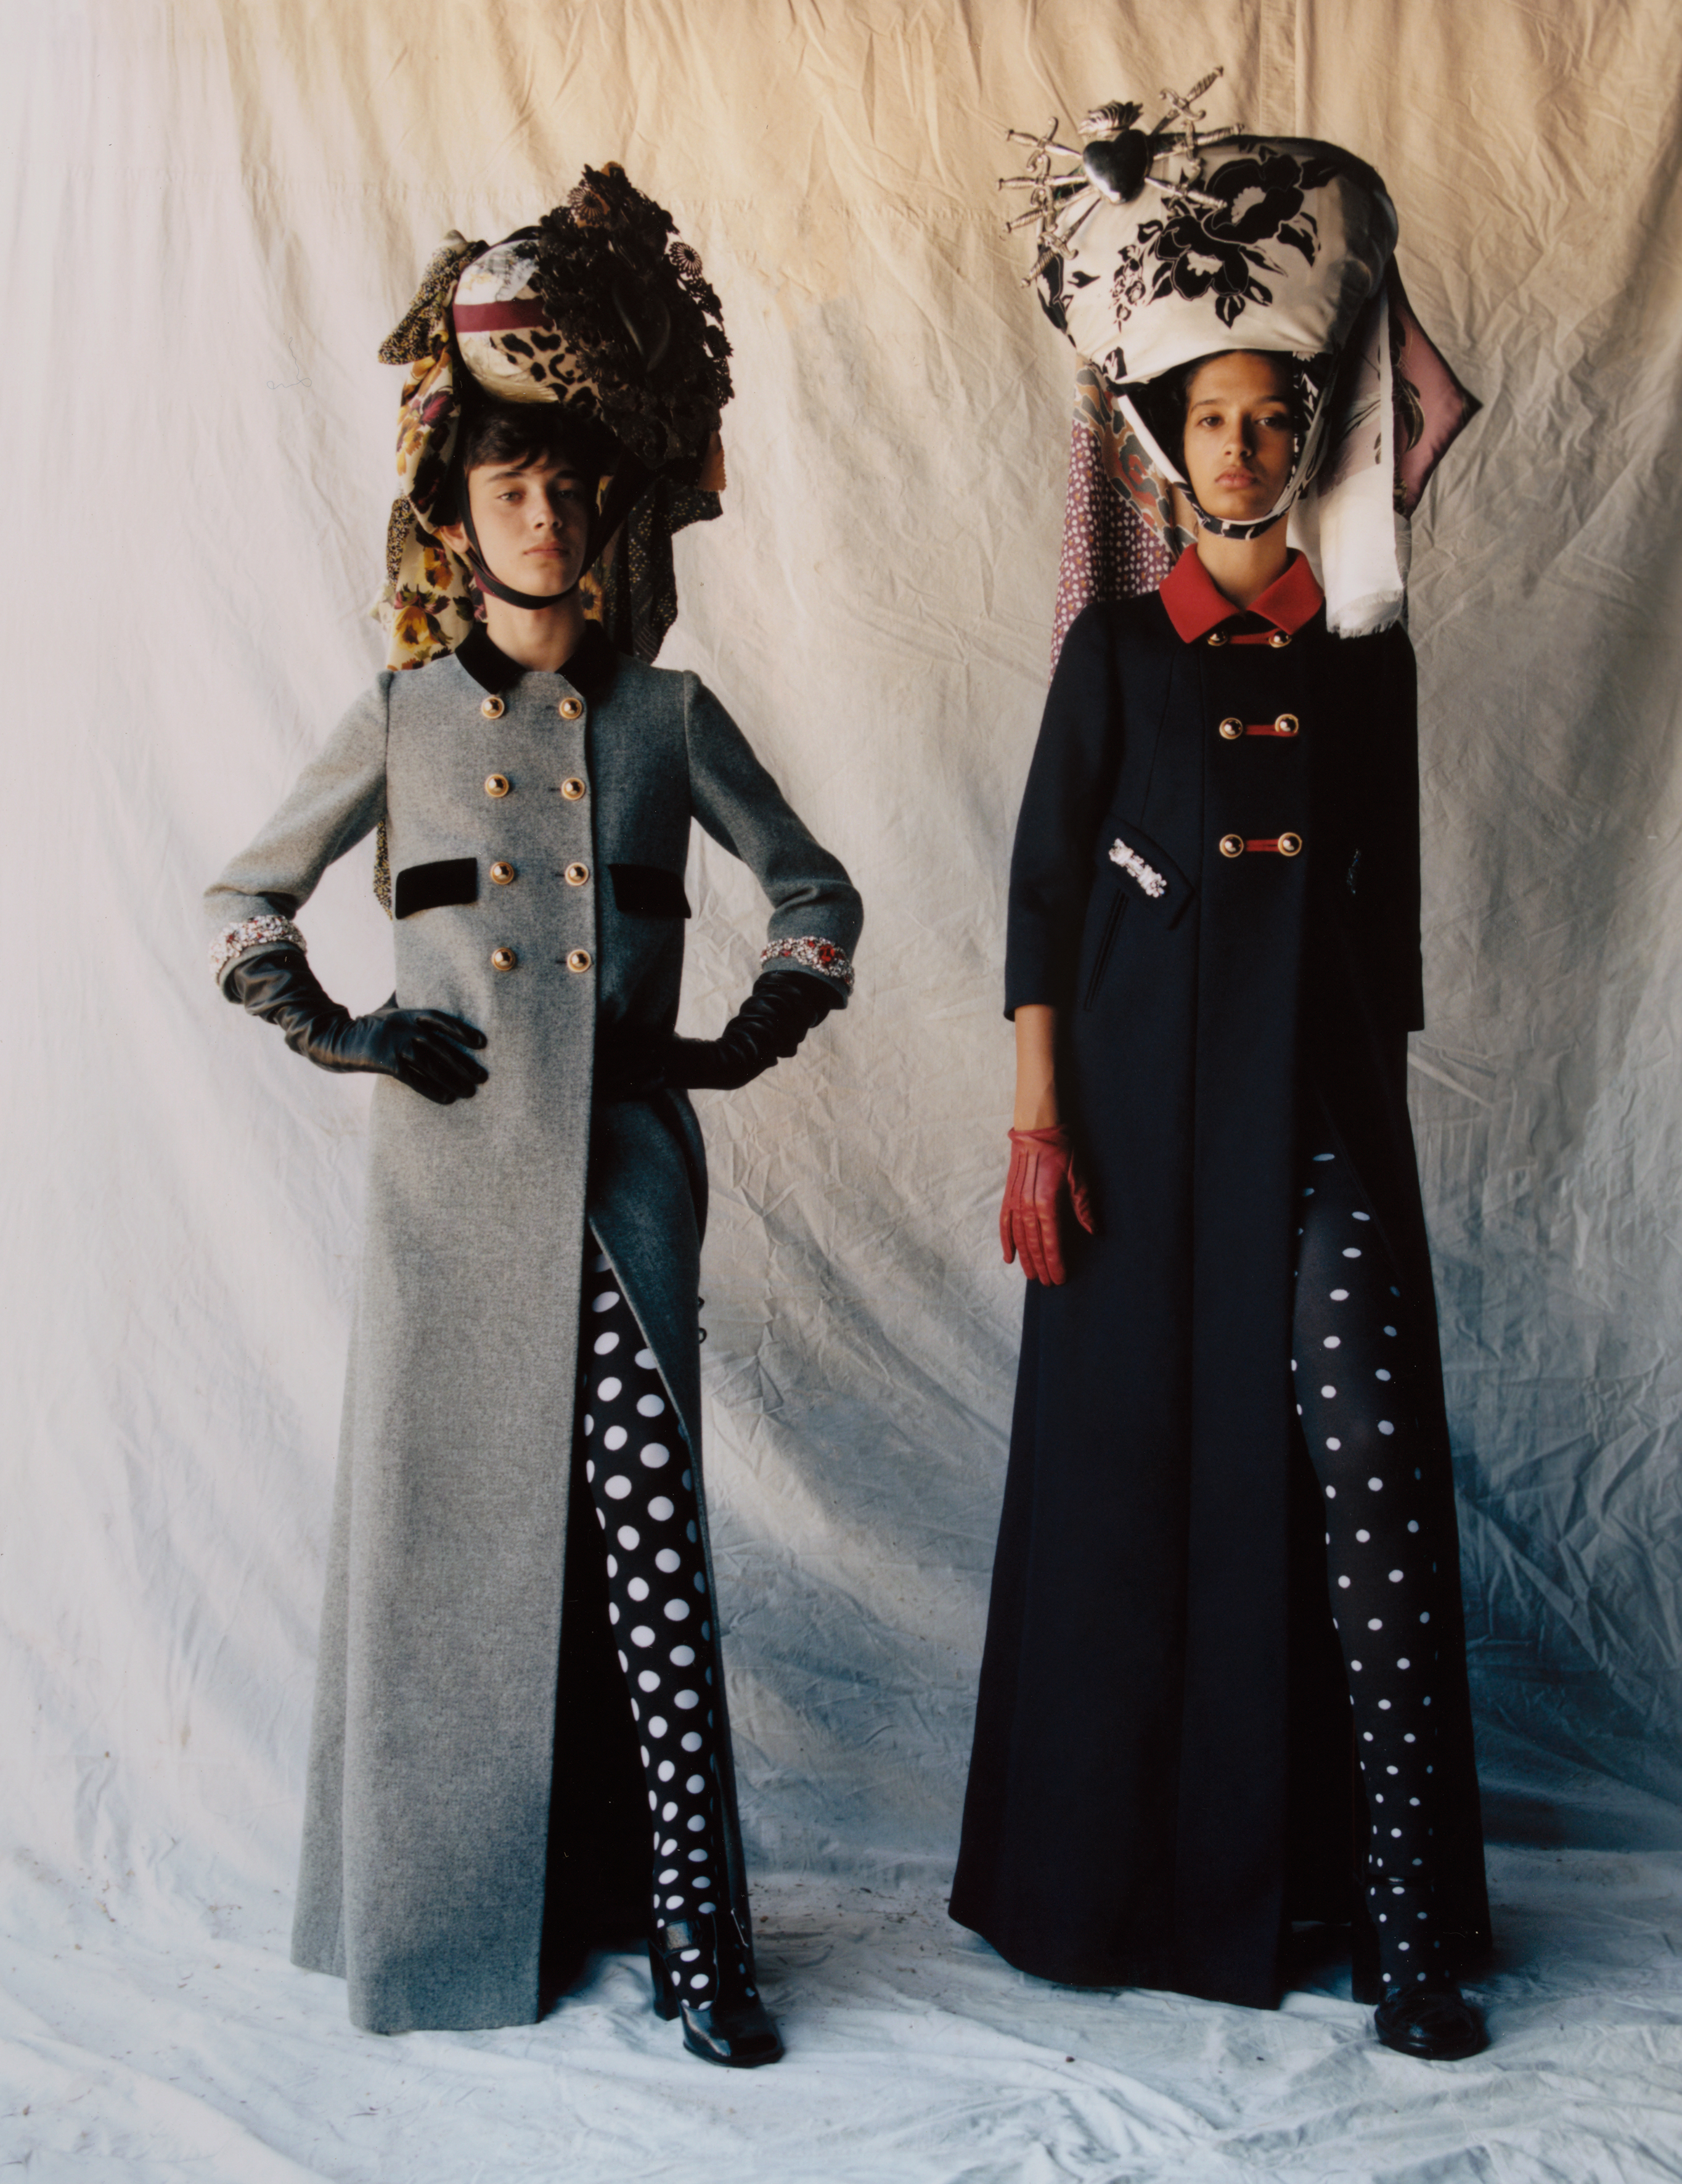 i-D on X: Portuguese youth in fantastical fashion by Giovanni